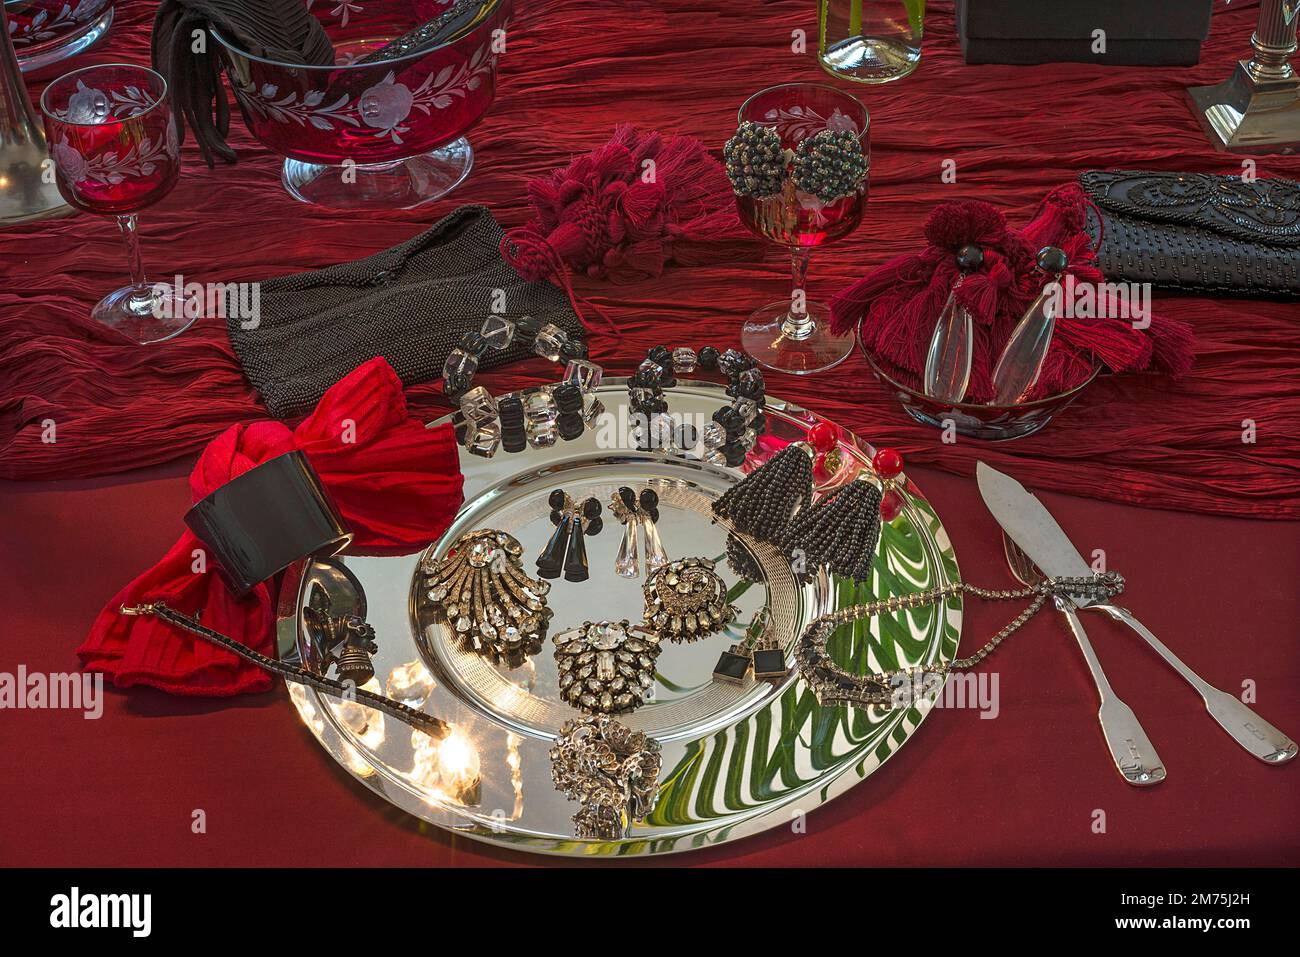 Rhinestone jewellery and accessories decorated on a silver plate and red cloth, Bavaria, Germany Stock Photo